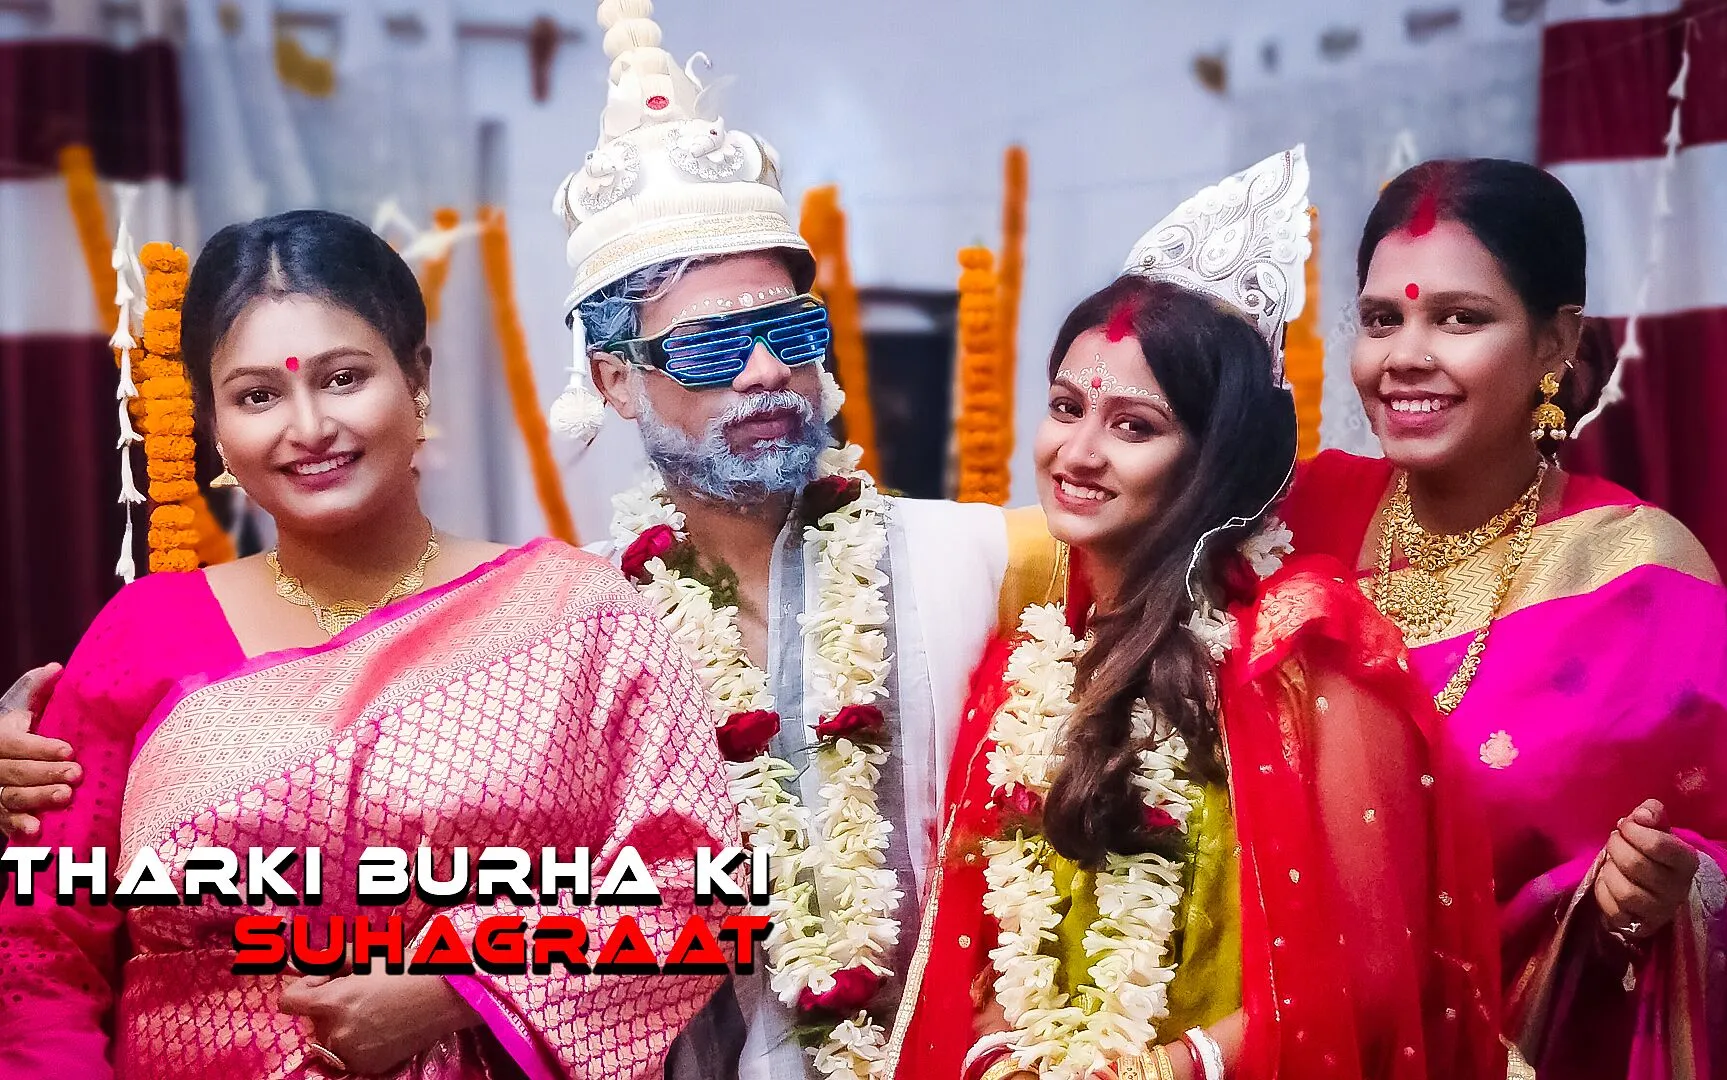 Crazy old man turns out to celebrate honeymoon with his three newly wed wives by Cine Flix Media Faphouse pic photo